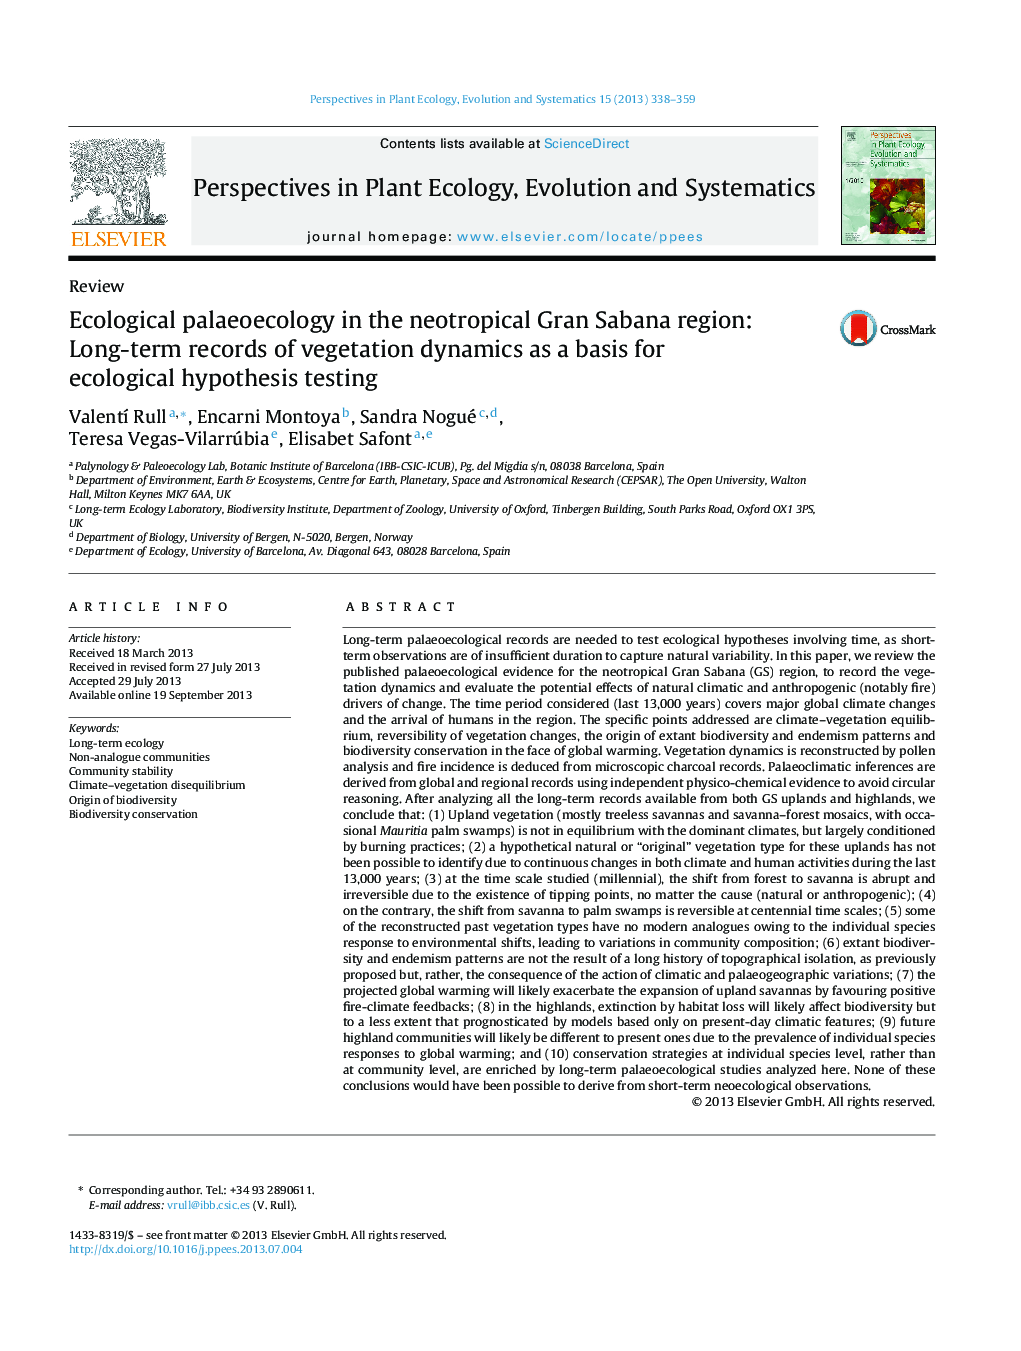 Ecological palaeoecology in the neotropical Gran Sabana region: Long-term records of vegetation dynamics as a basis for ecological hypothesis testing